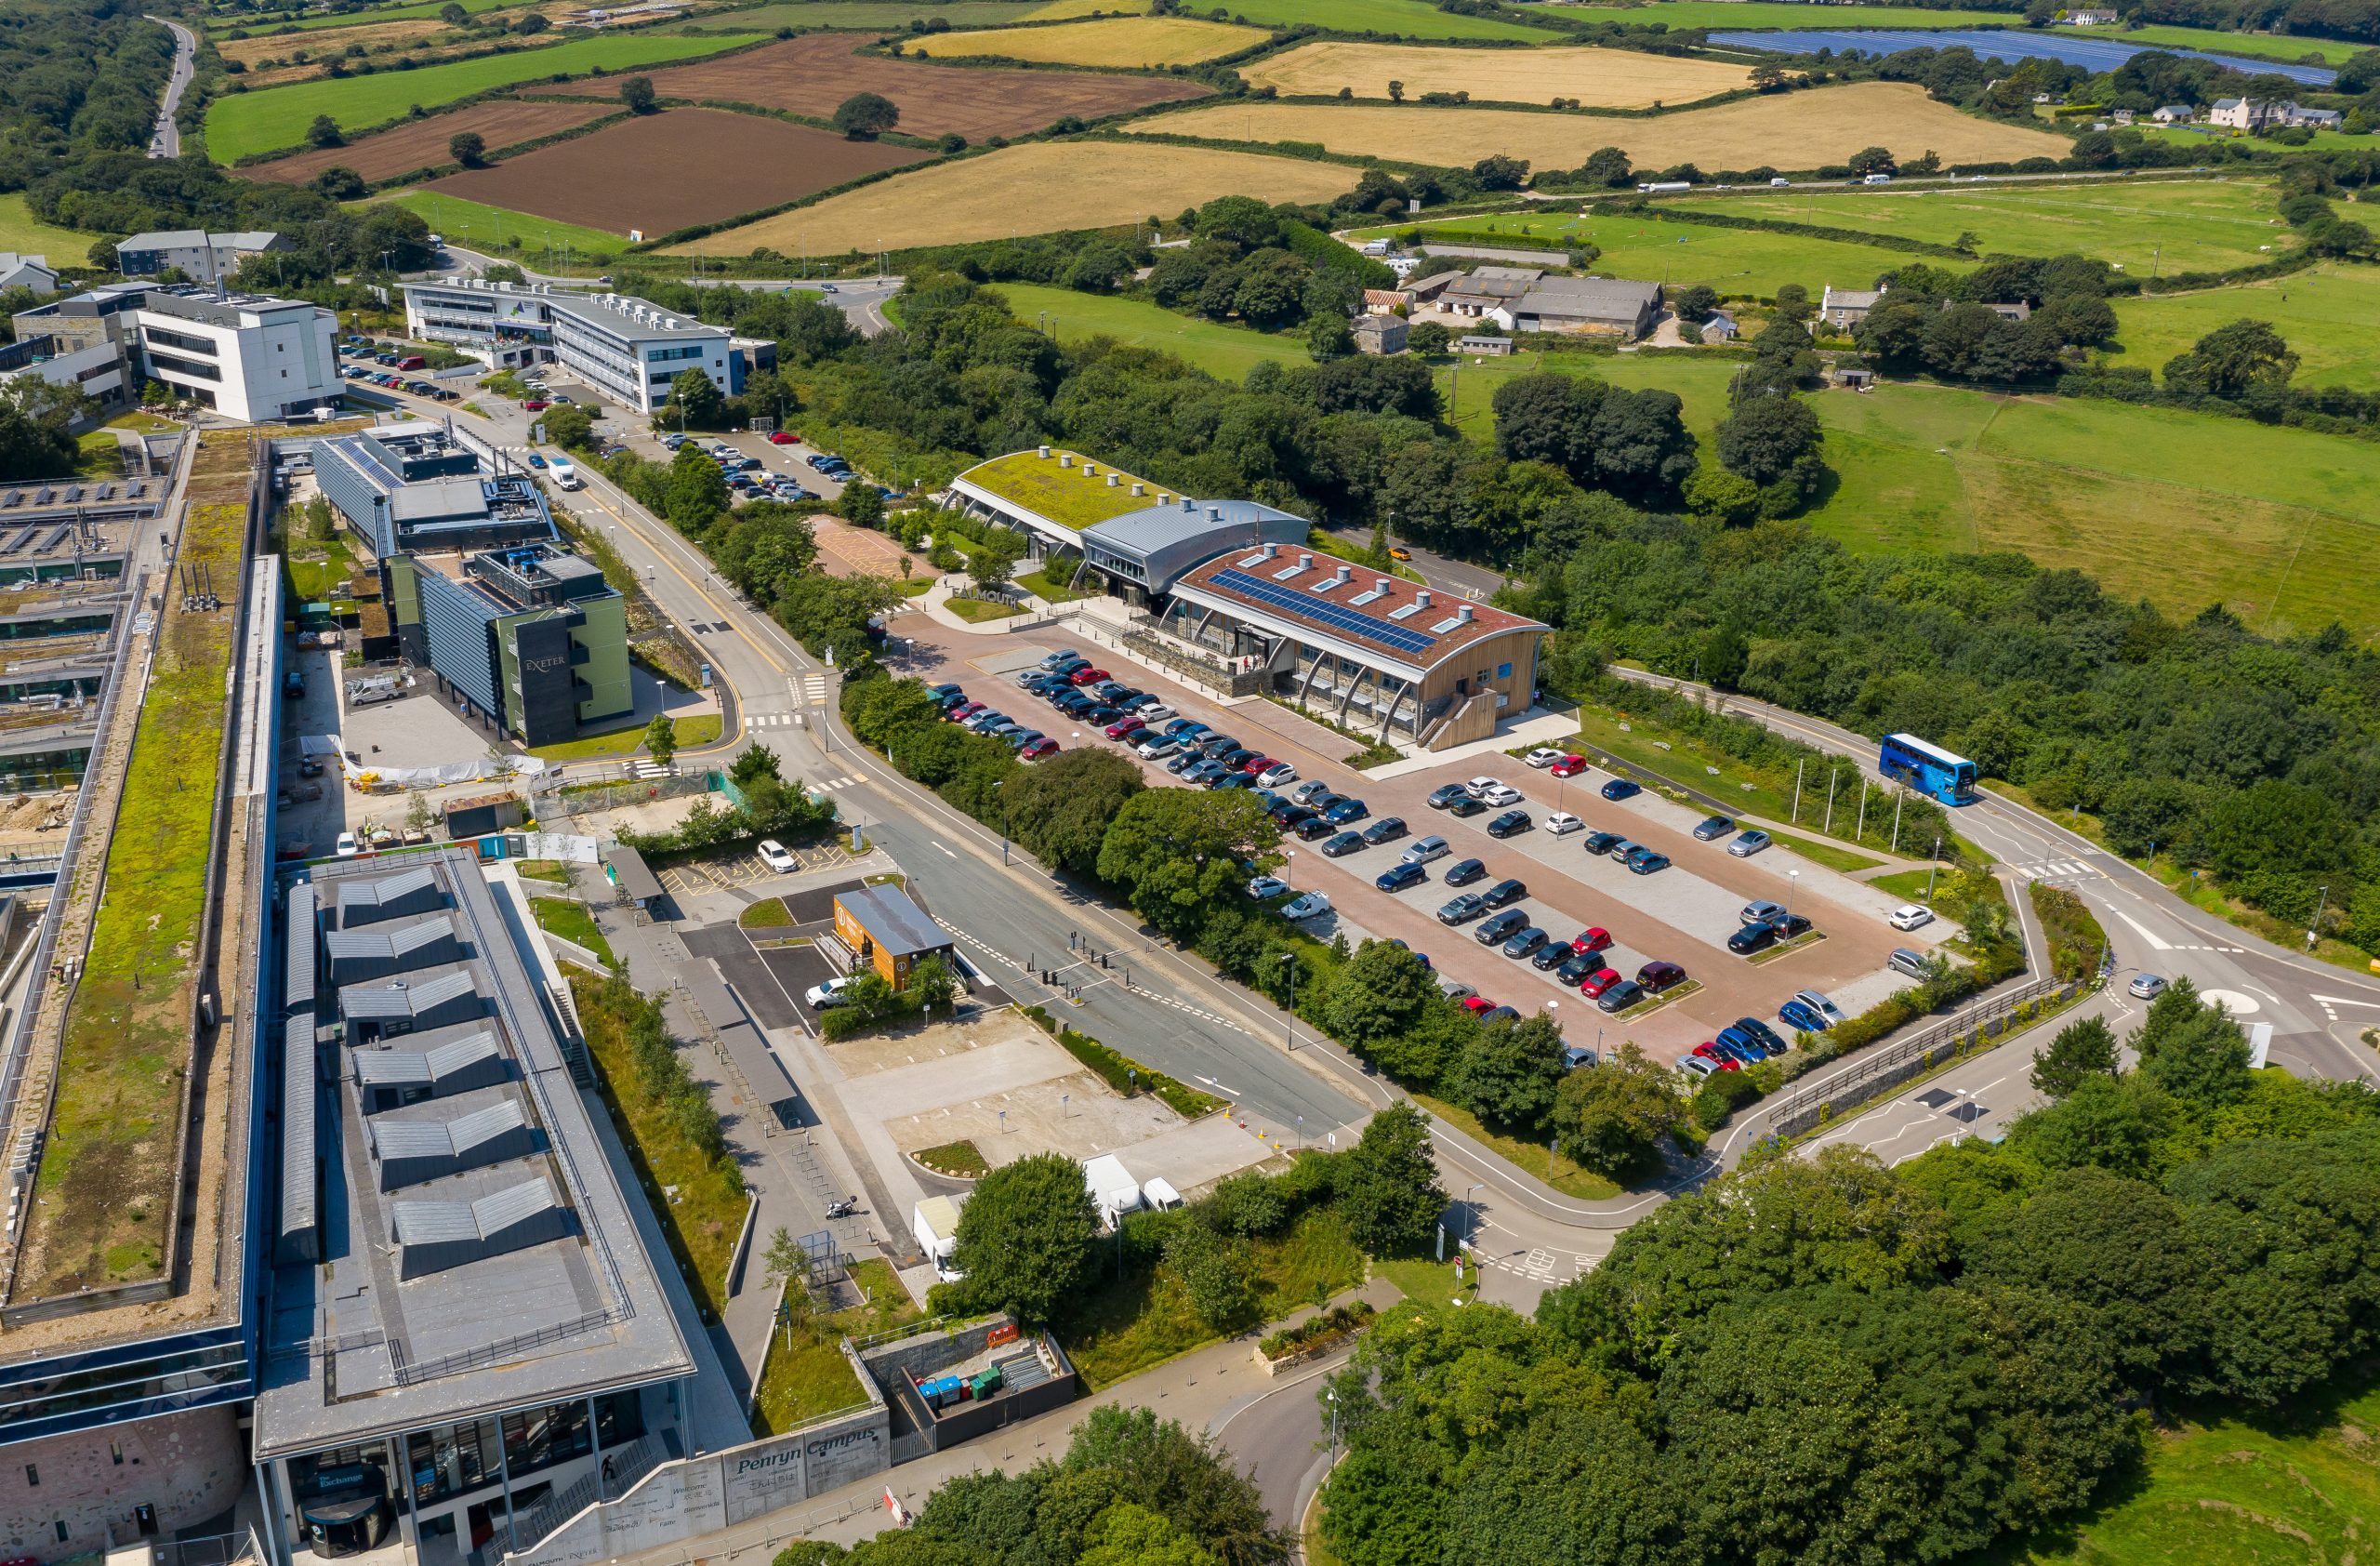 Aerial shot of Penryn Campus including Exeter's Stella Turk building